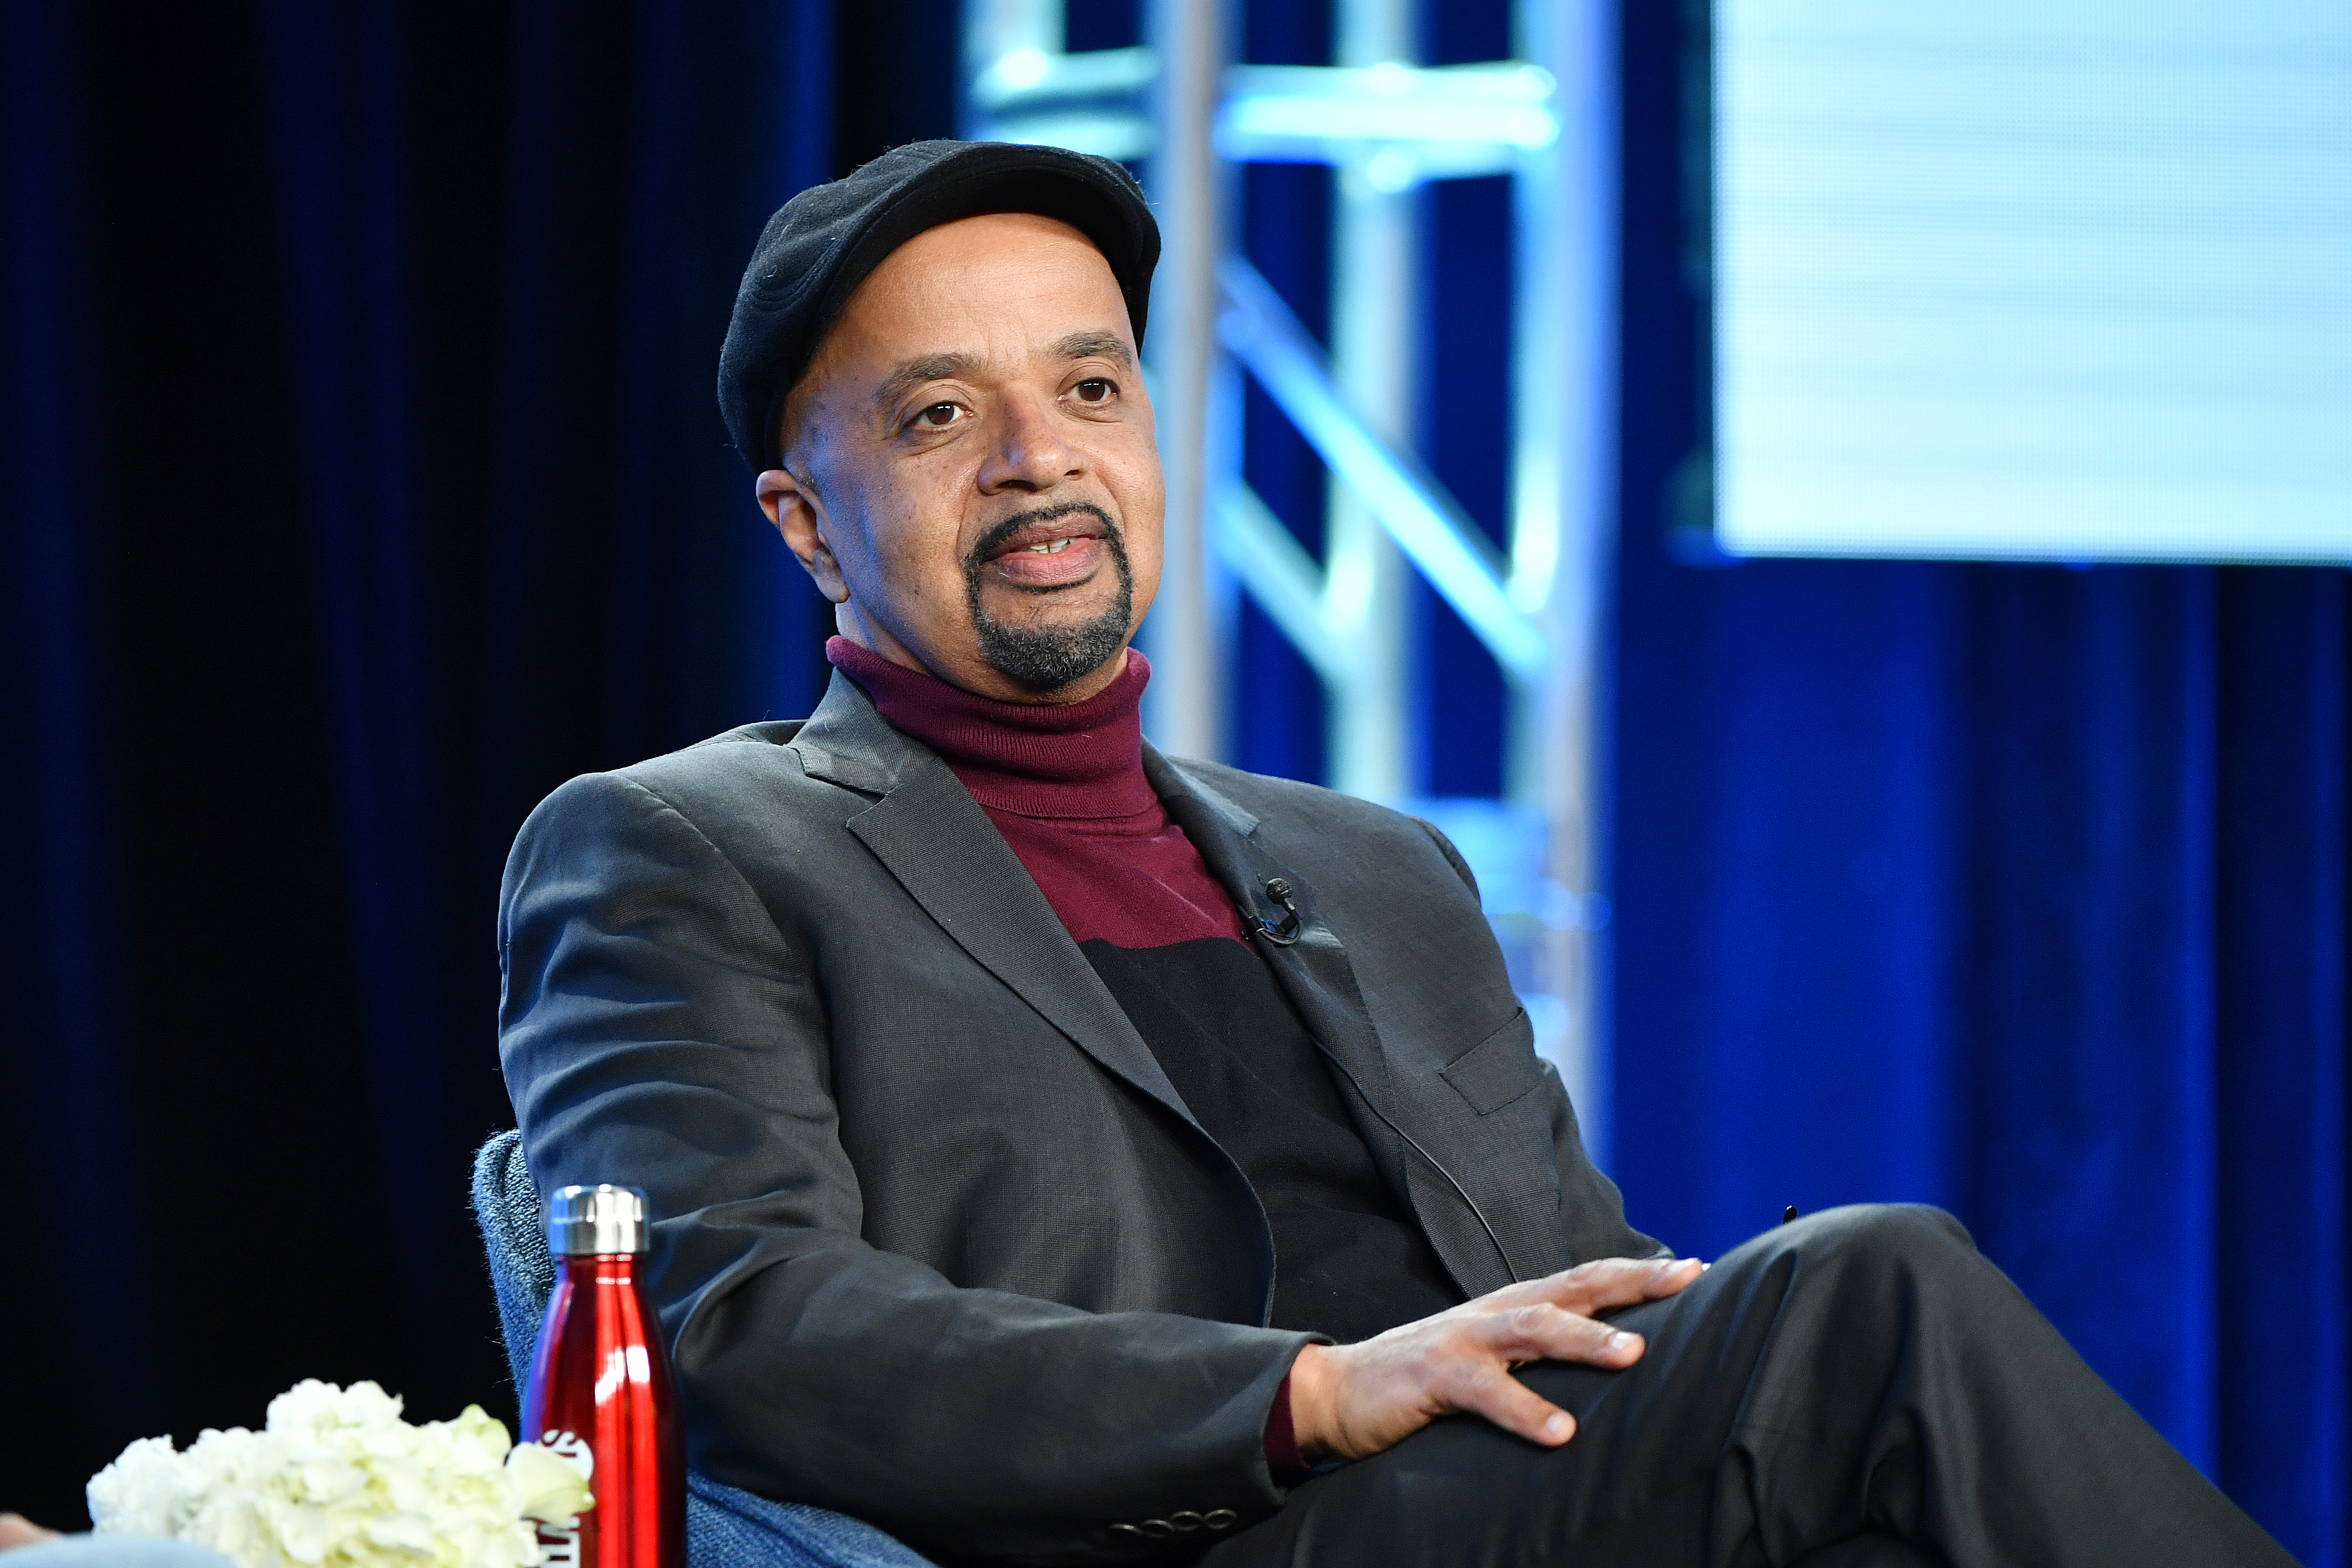 James McBride wins $50,000 Kirkus Prize for fiction for ‘The Heaven & Earth Grocery Store’